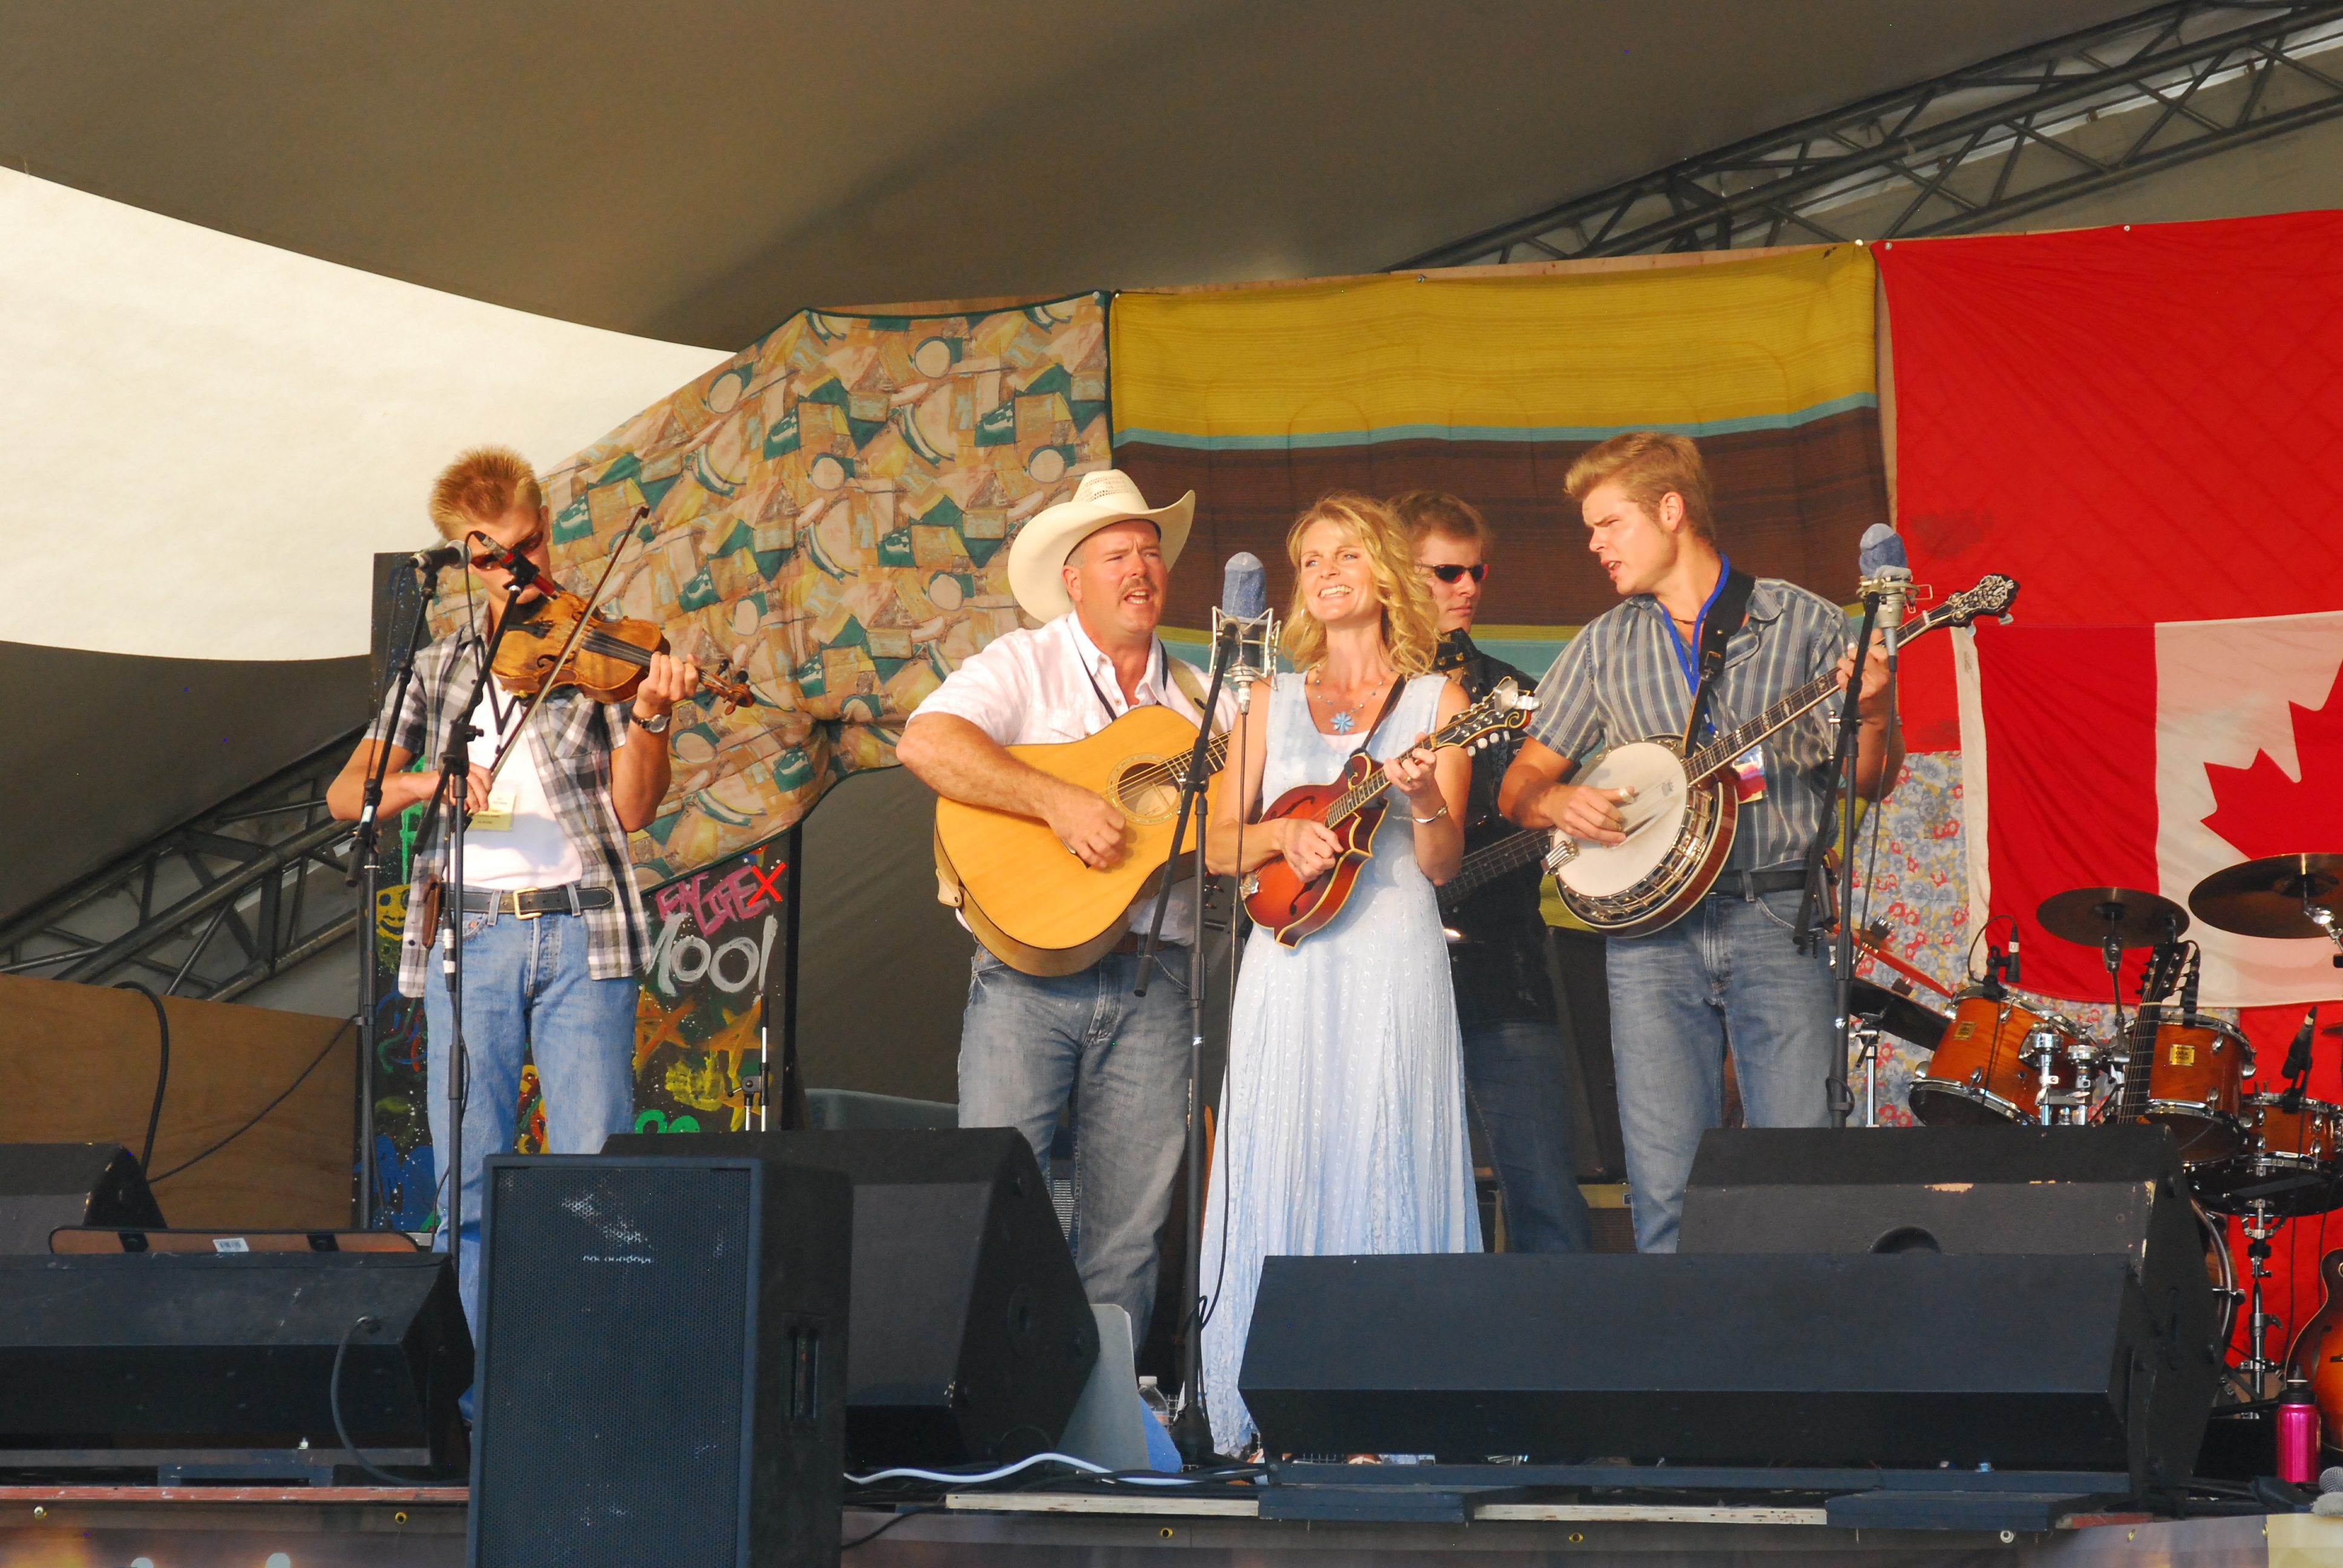 AGELESS MELODIES -The Larsgard Family Band performed for the Sunday crowd of the Central Music Festival with their broad repertoire of music ranging from bluegrass to traditional country music.